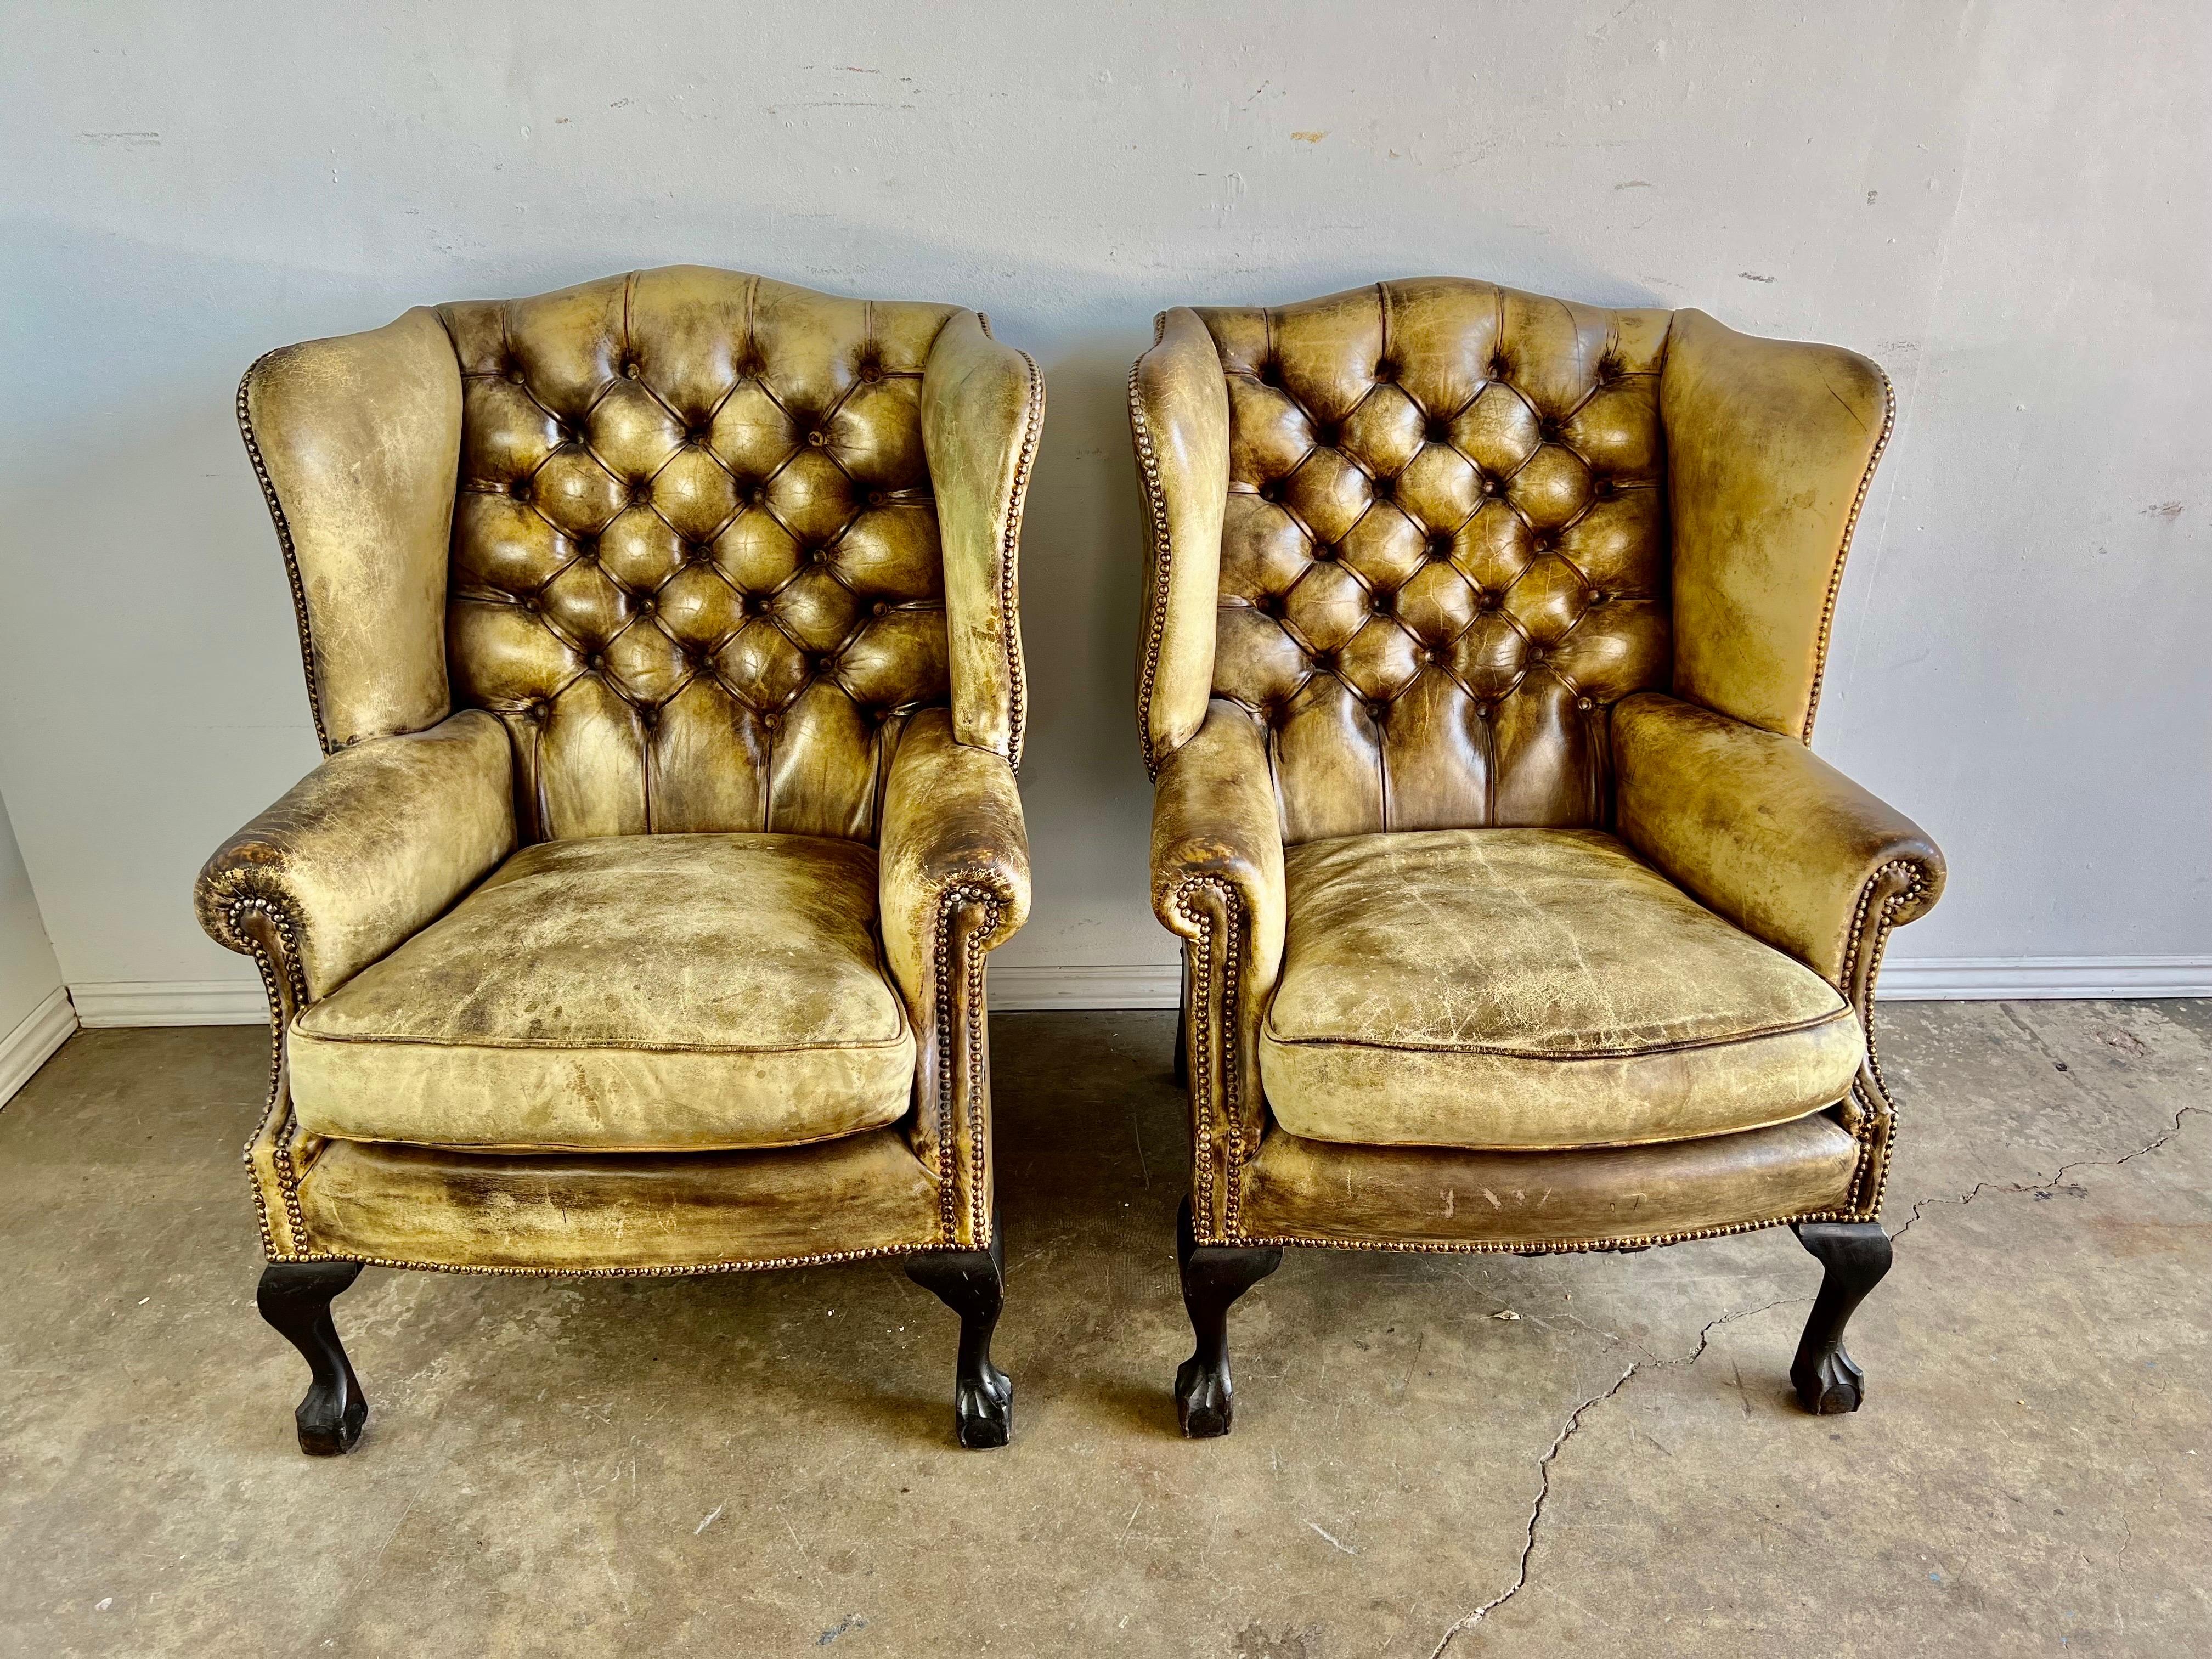 Pair of English Chippendale Leather Tufted Wingback armchairs. The chairs stand on four ball & claw feet. The leather is beautifully worn but has no holes or tears.